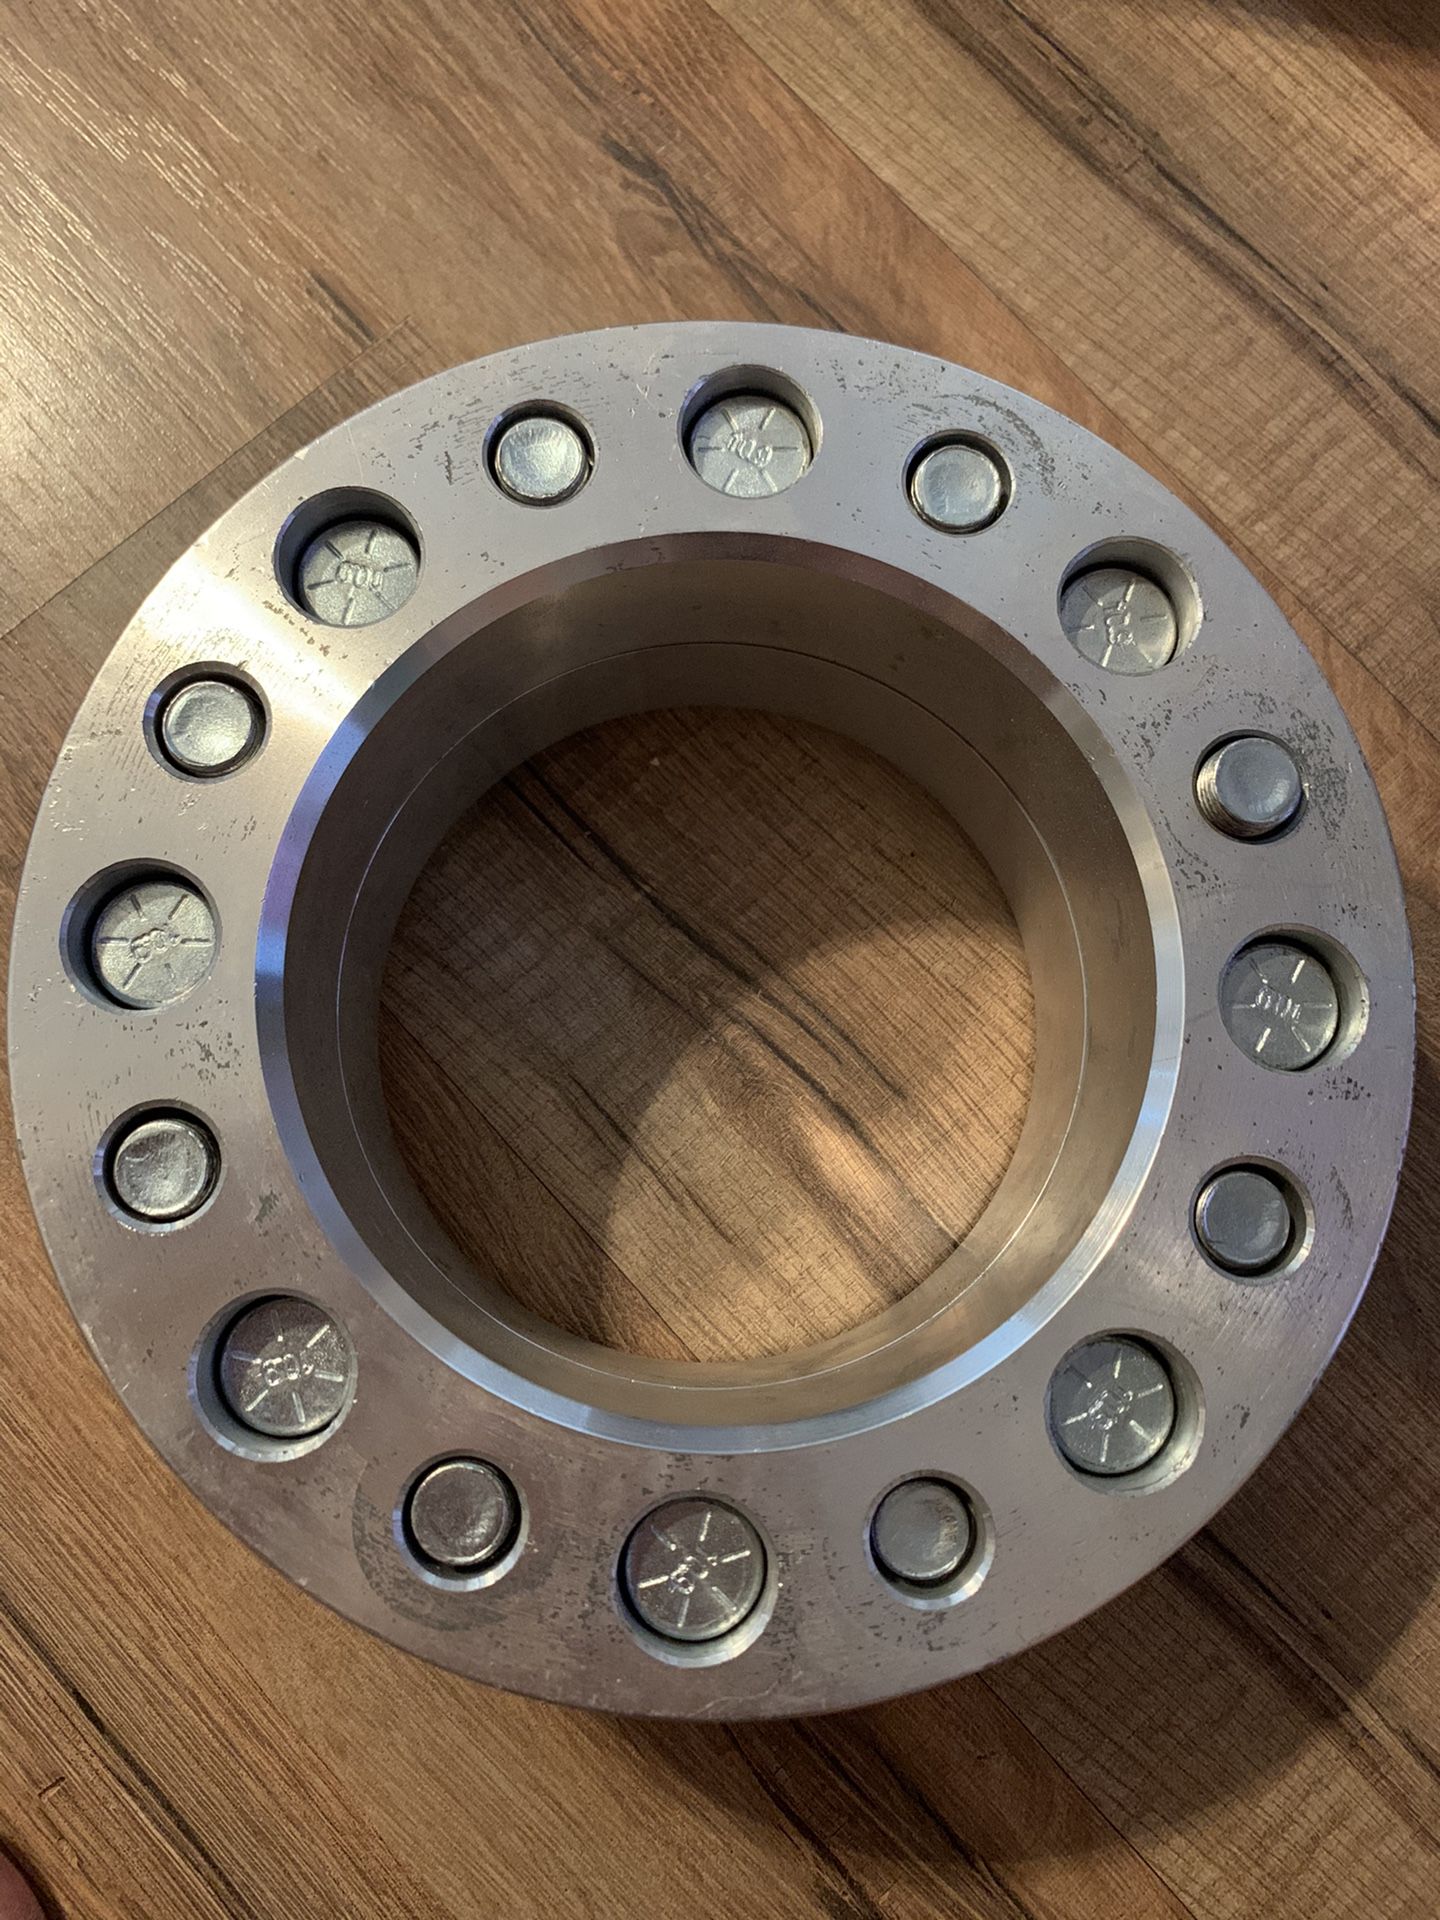 Chevy 8x6.5 steel wheel spacer 1 1/2 inch thick includes 2 spacers